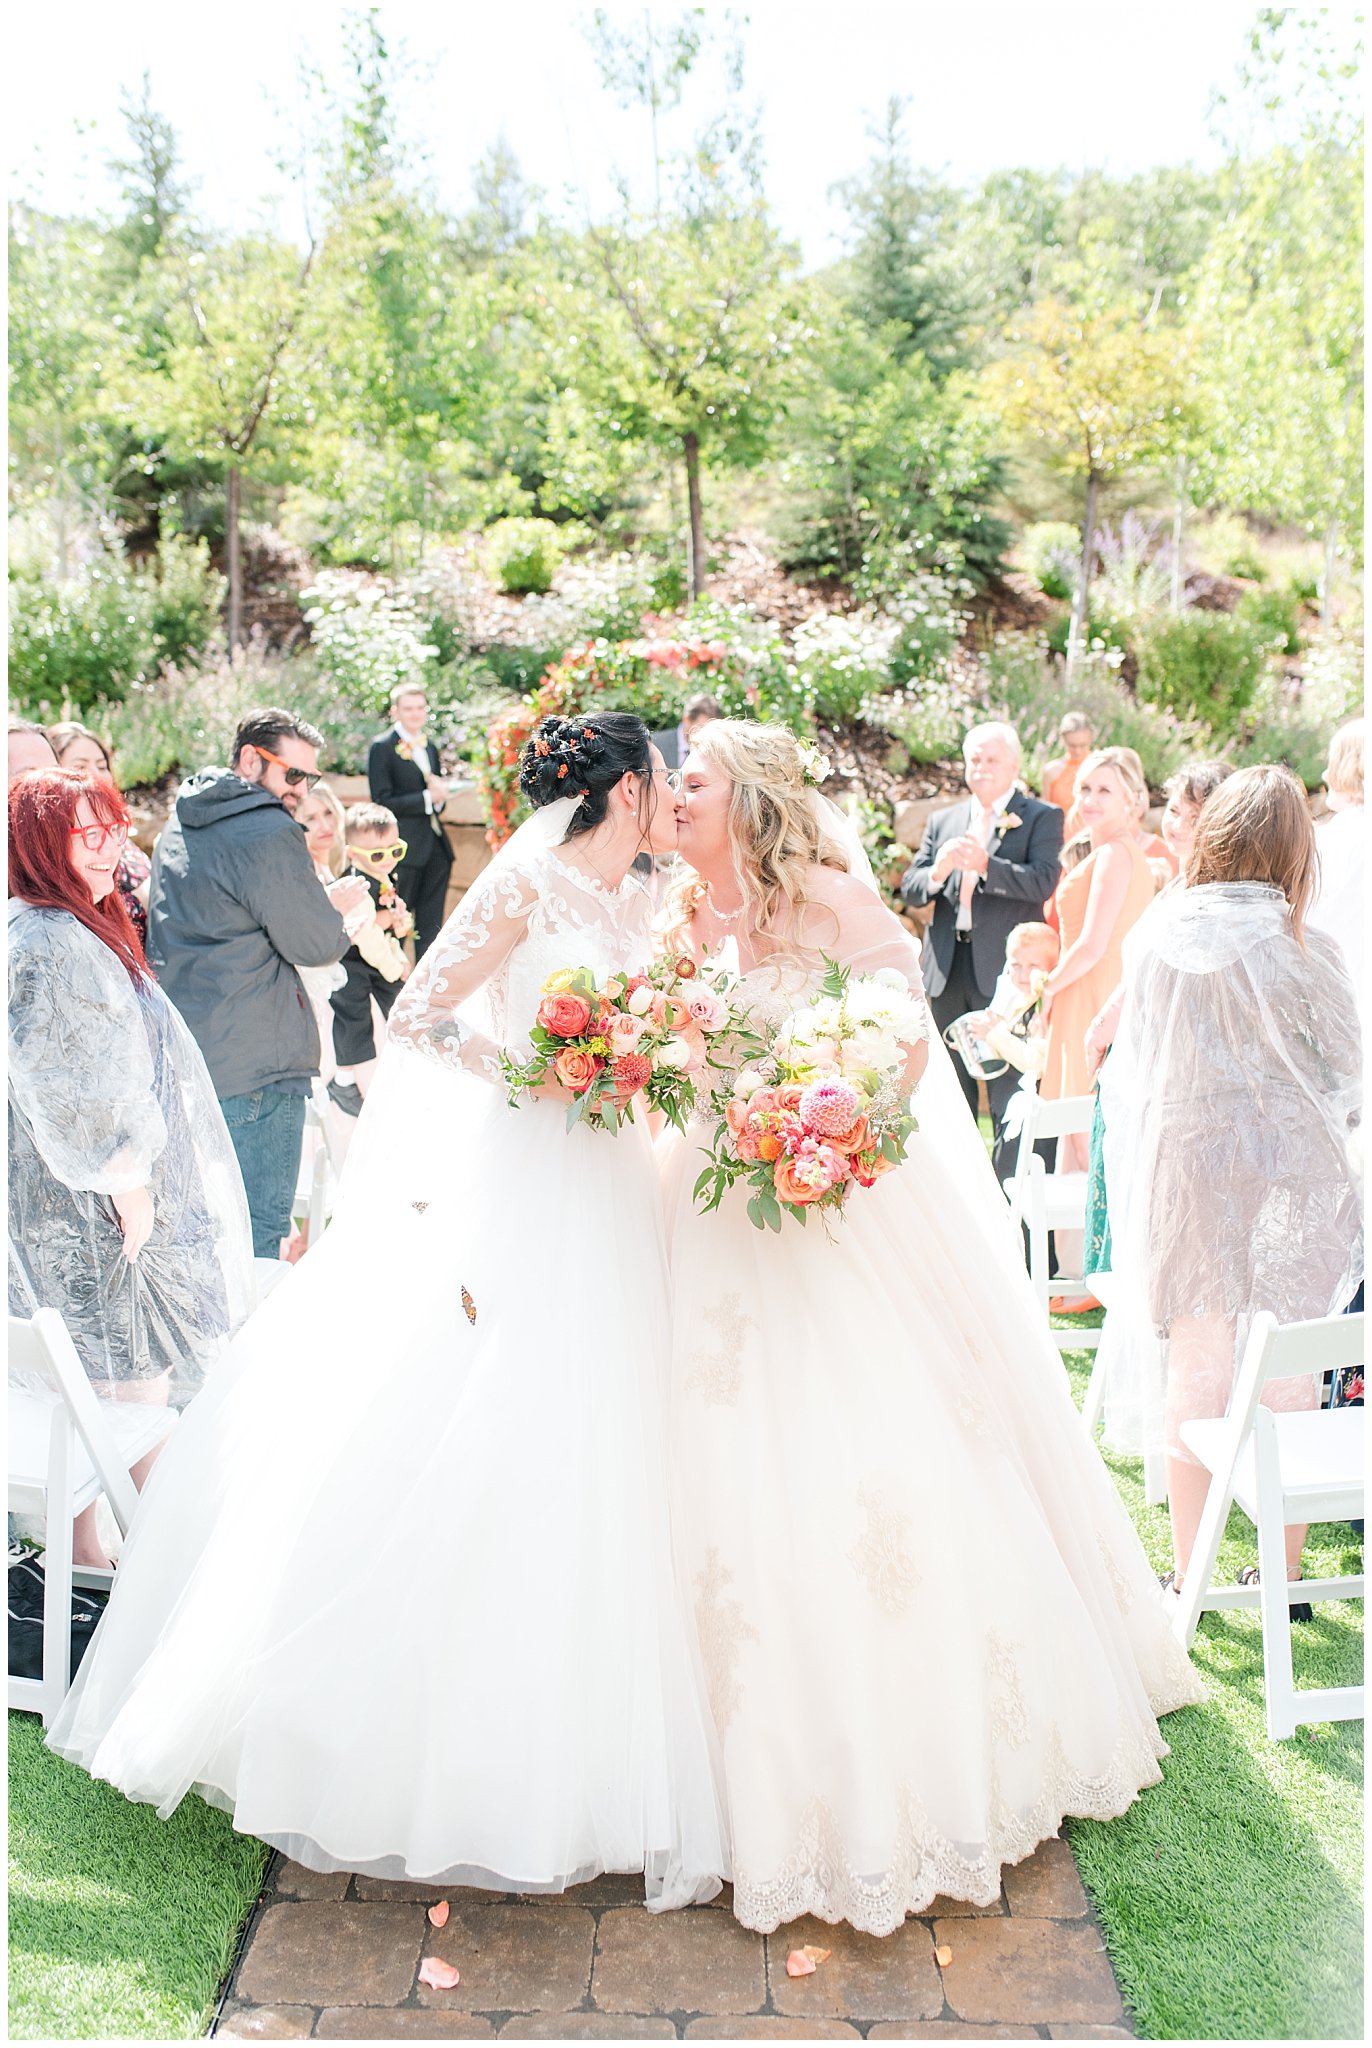 Butterfly ceremony release | Butterfly wedding with sunset colors | Park City Wedding at the Hyatt Centric | Jessie and Dallin Photography